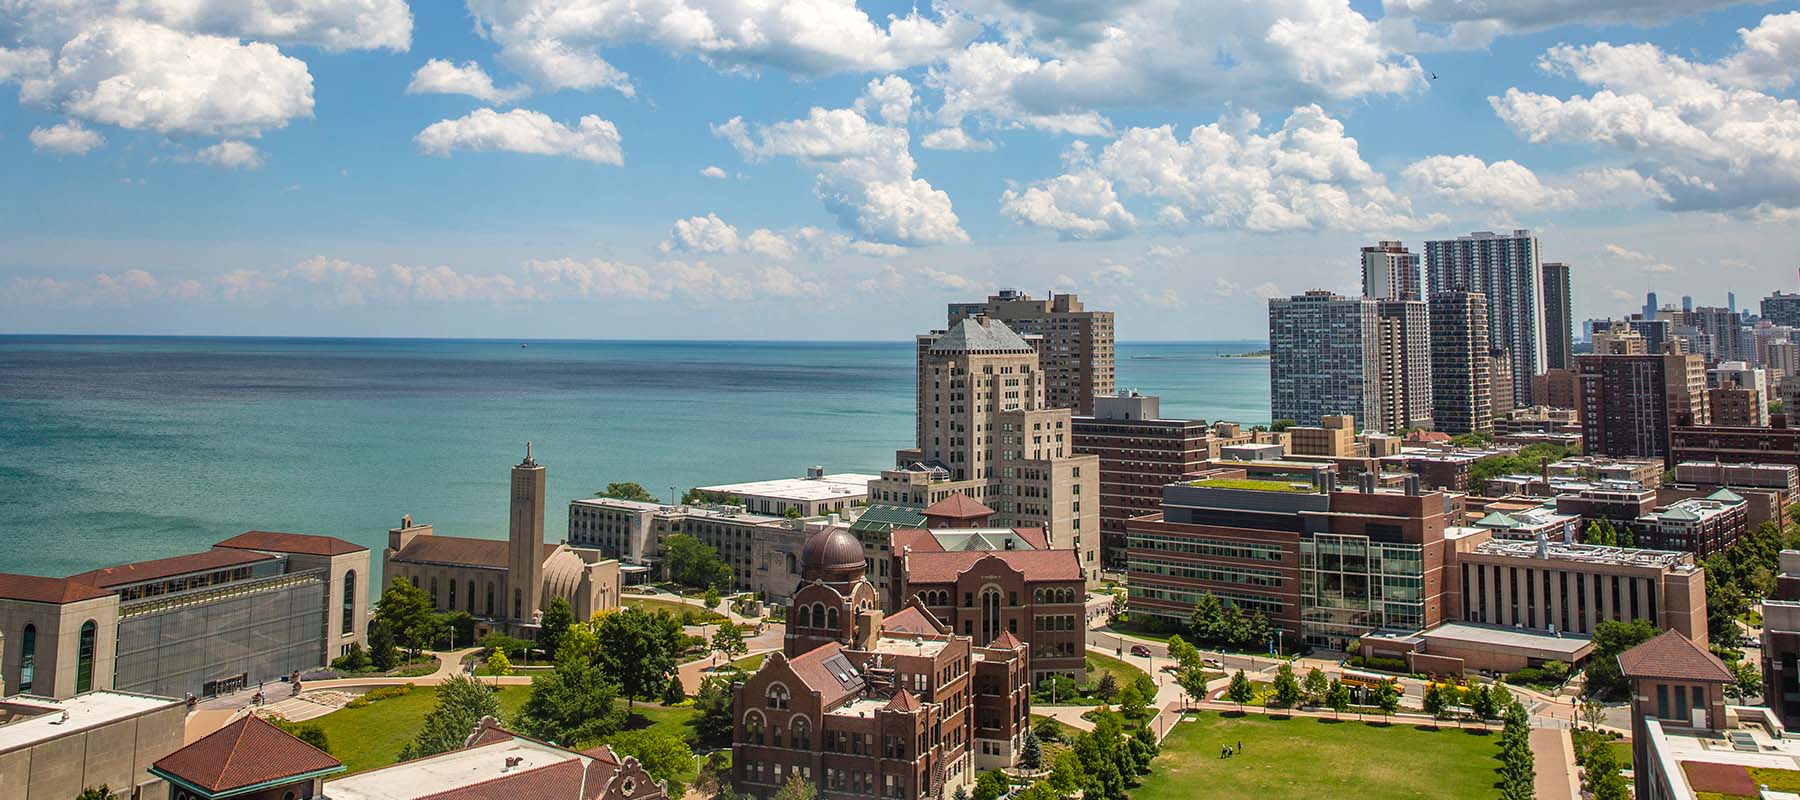 Aerial views of the Lake Shore Campus from the roof of Mertz Hall